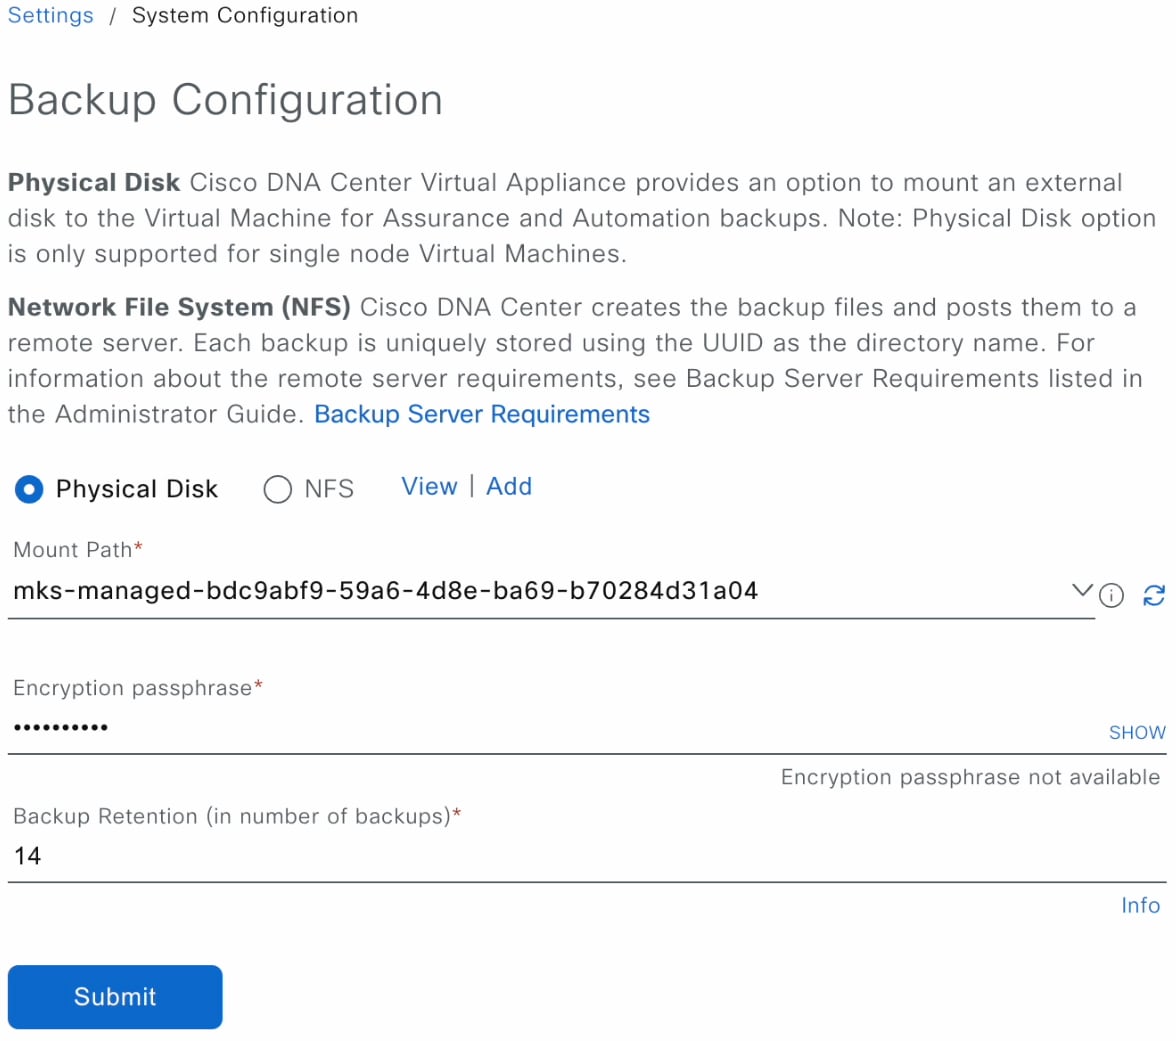 The Backup Configuration page shows the physical disk option, mount path, encryption passphrase, and backup retention.